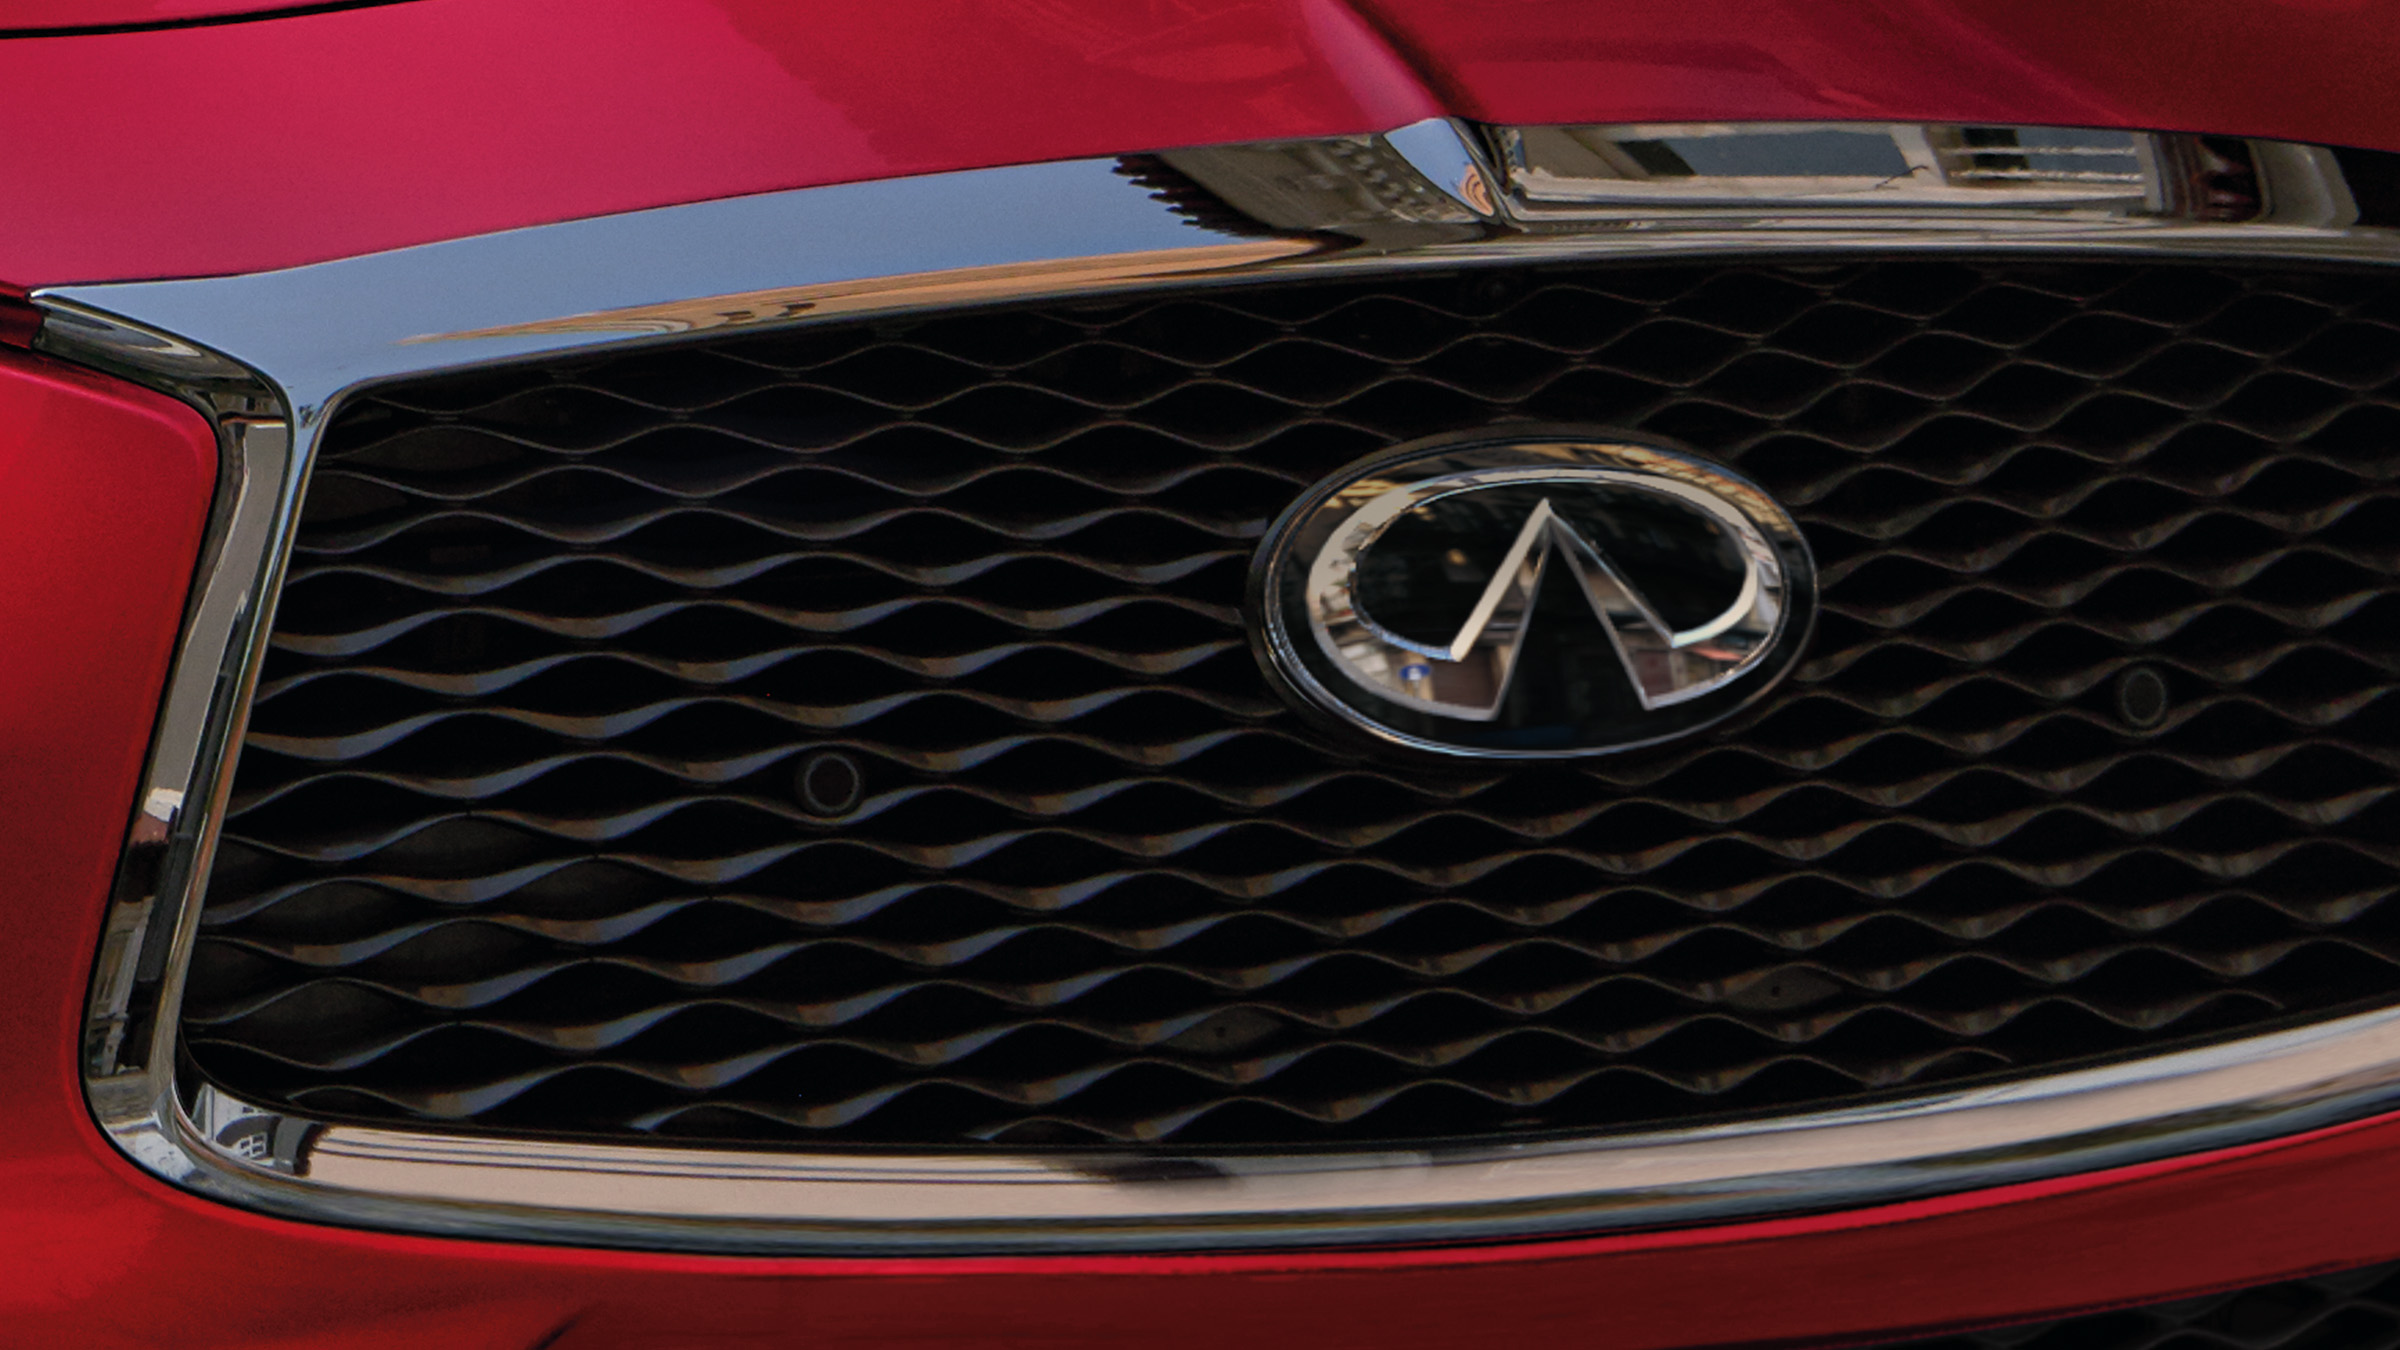 2022 INFINITI Q60 red car double arch grille.